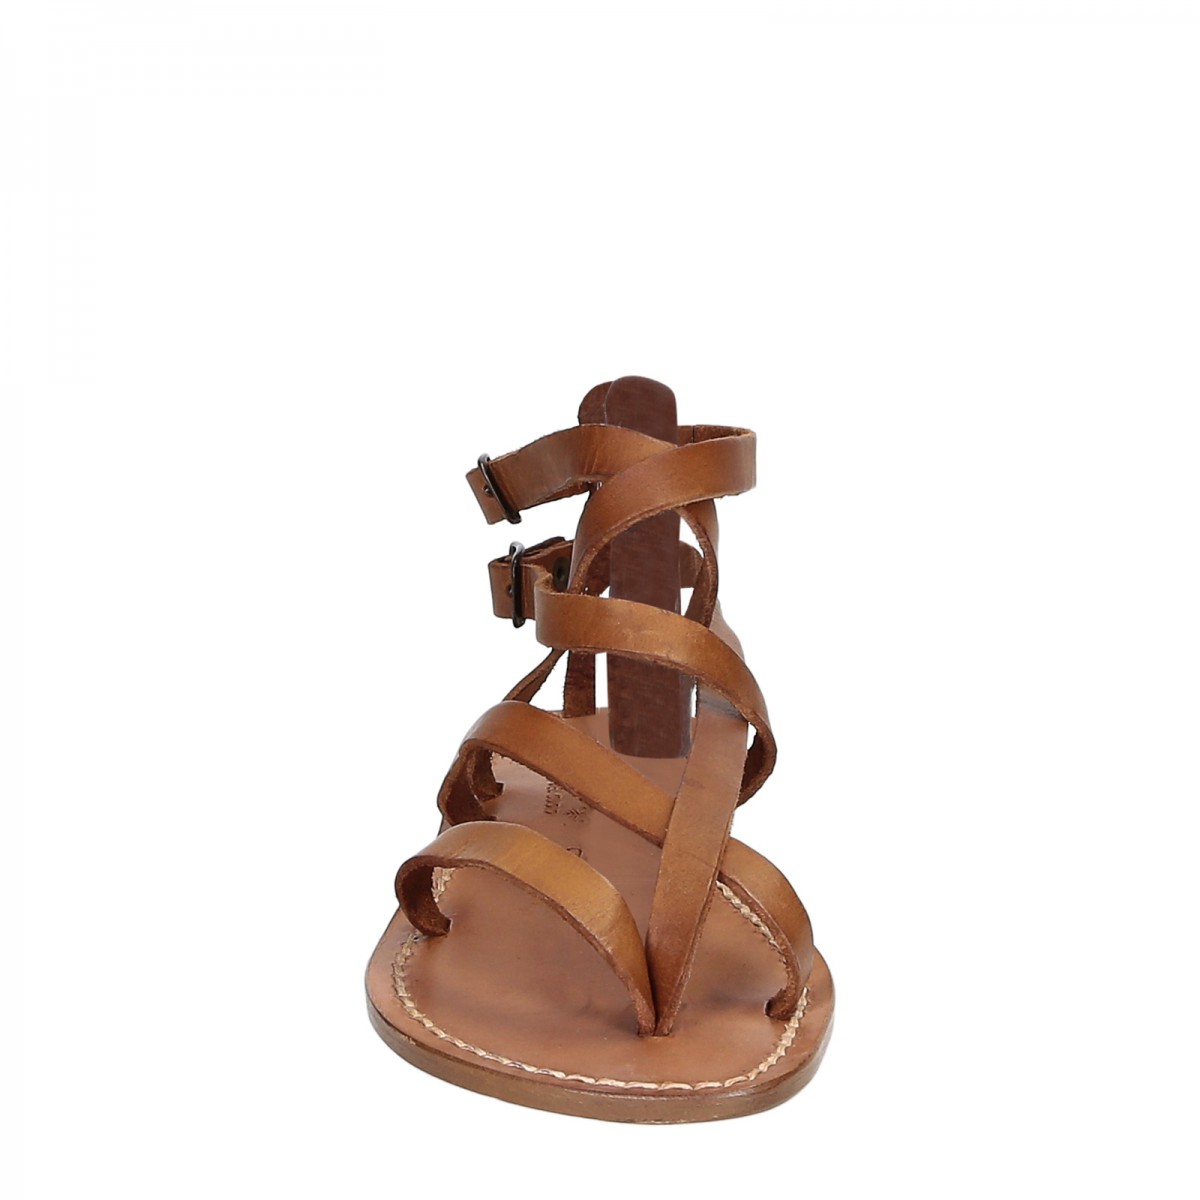 Handmade women's flat sandals in tan leather | Gianluca - The leather ...